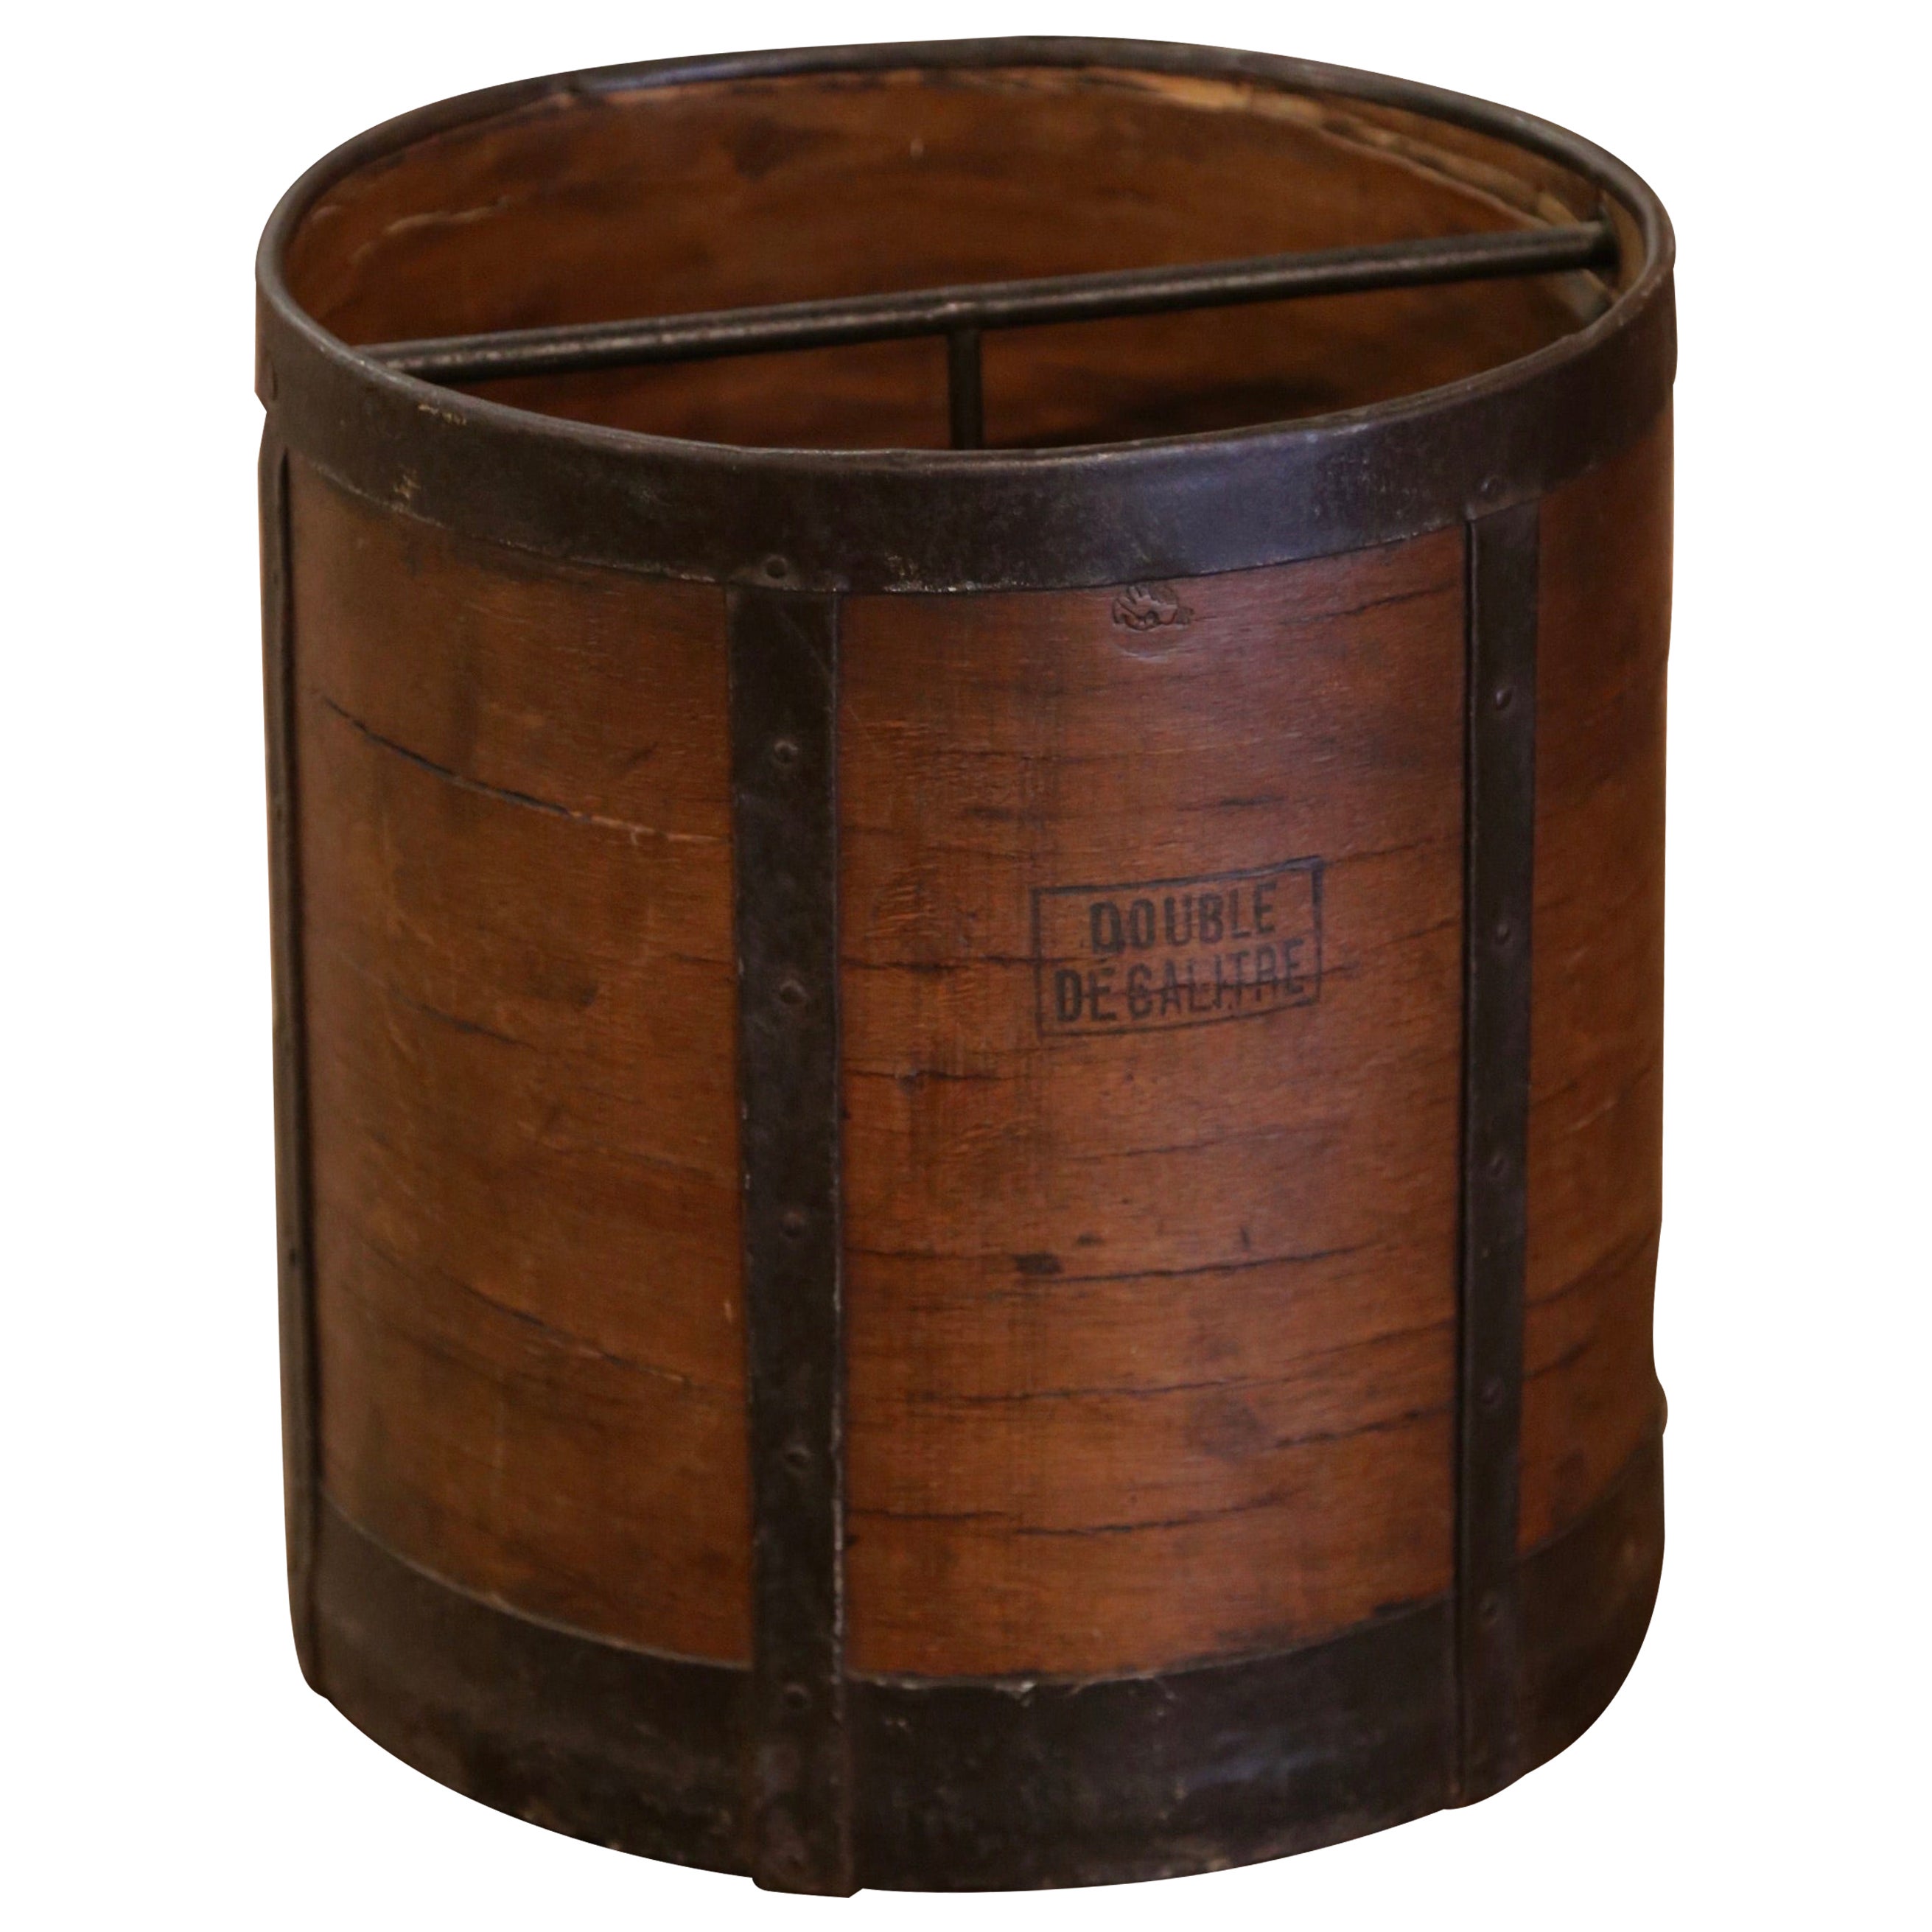 19th Century French Wood and Iron Grain Measure Bucket or Waste Basket